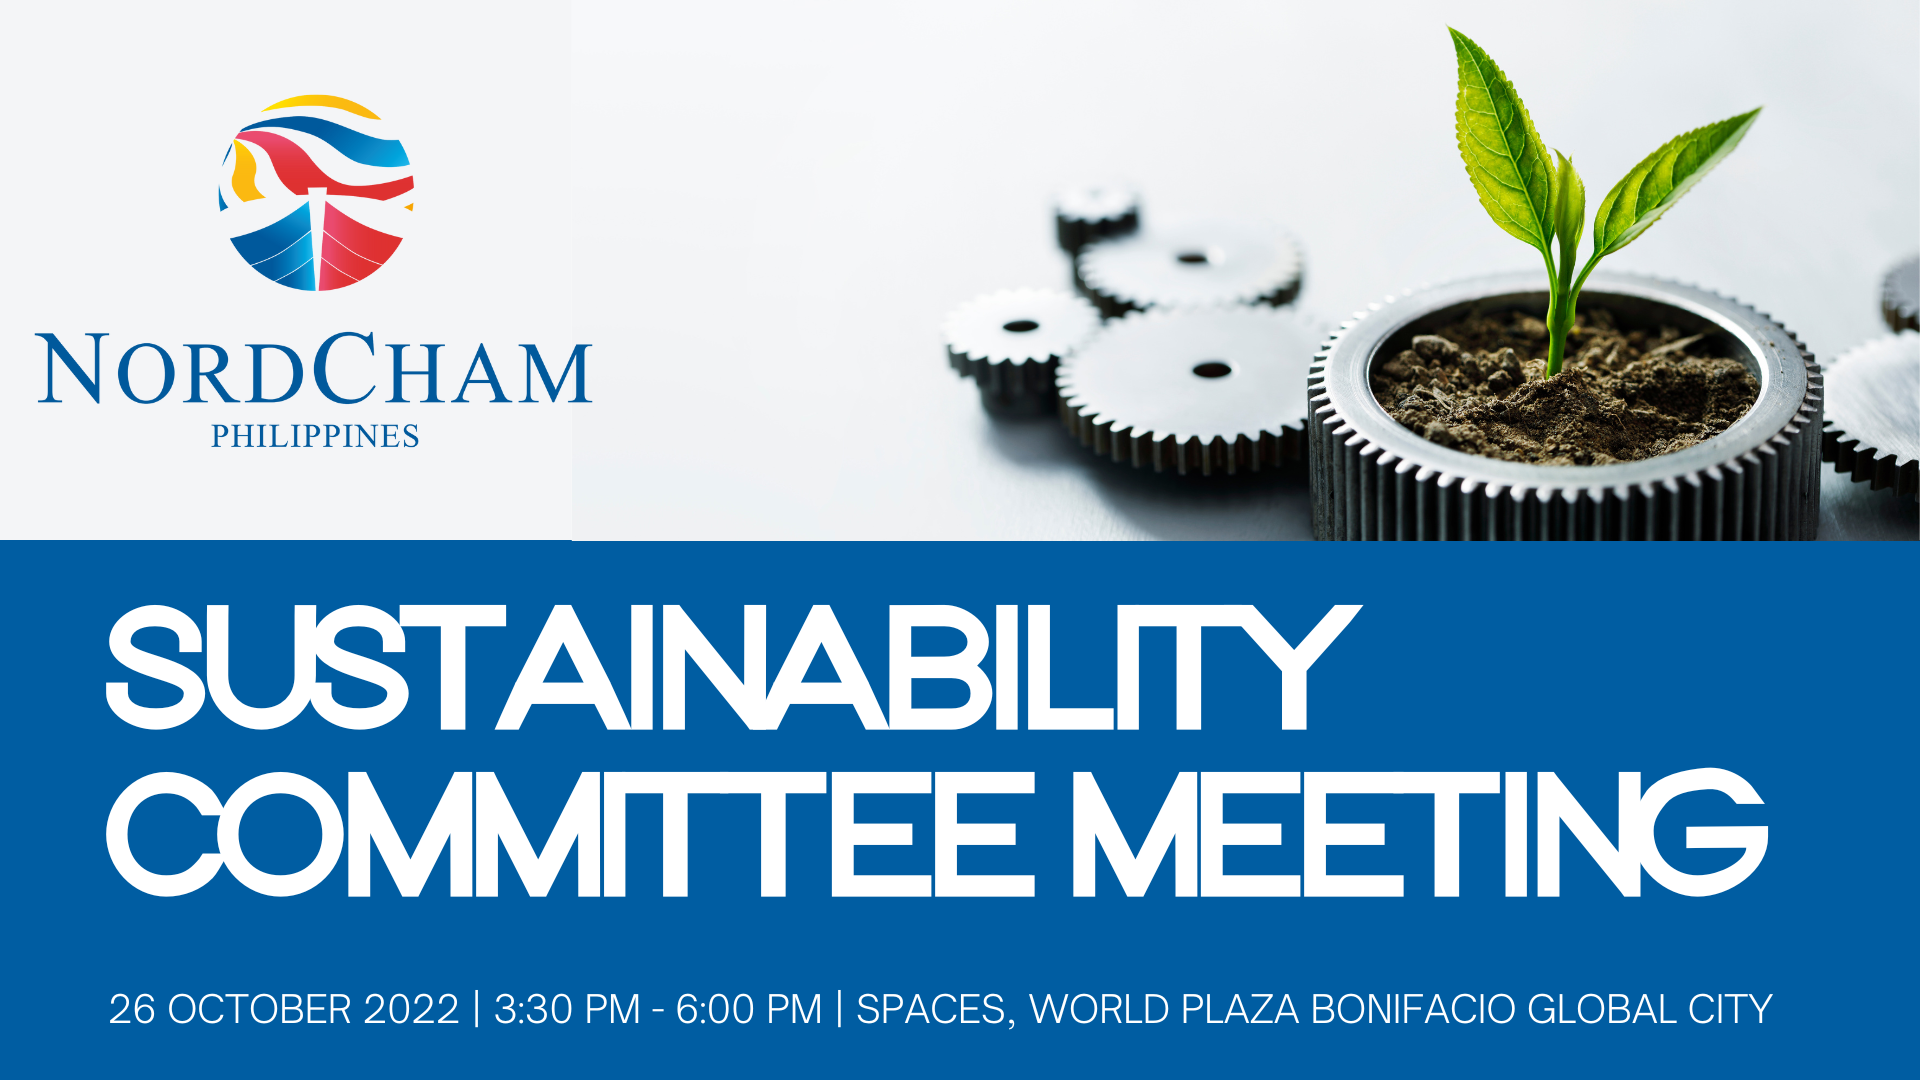 thumbnails Sustainability Committee Meeting: Gender, Diversity and Inclusion in the Workplace